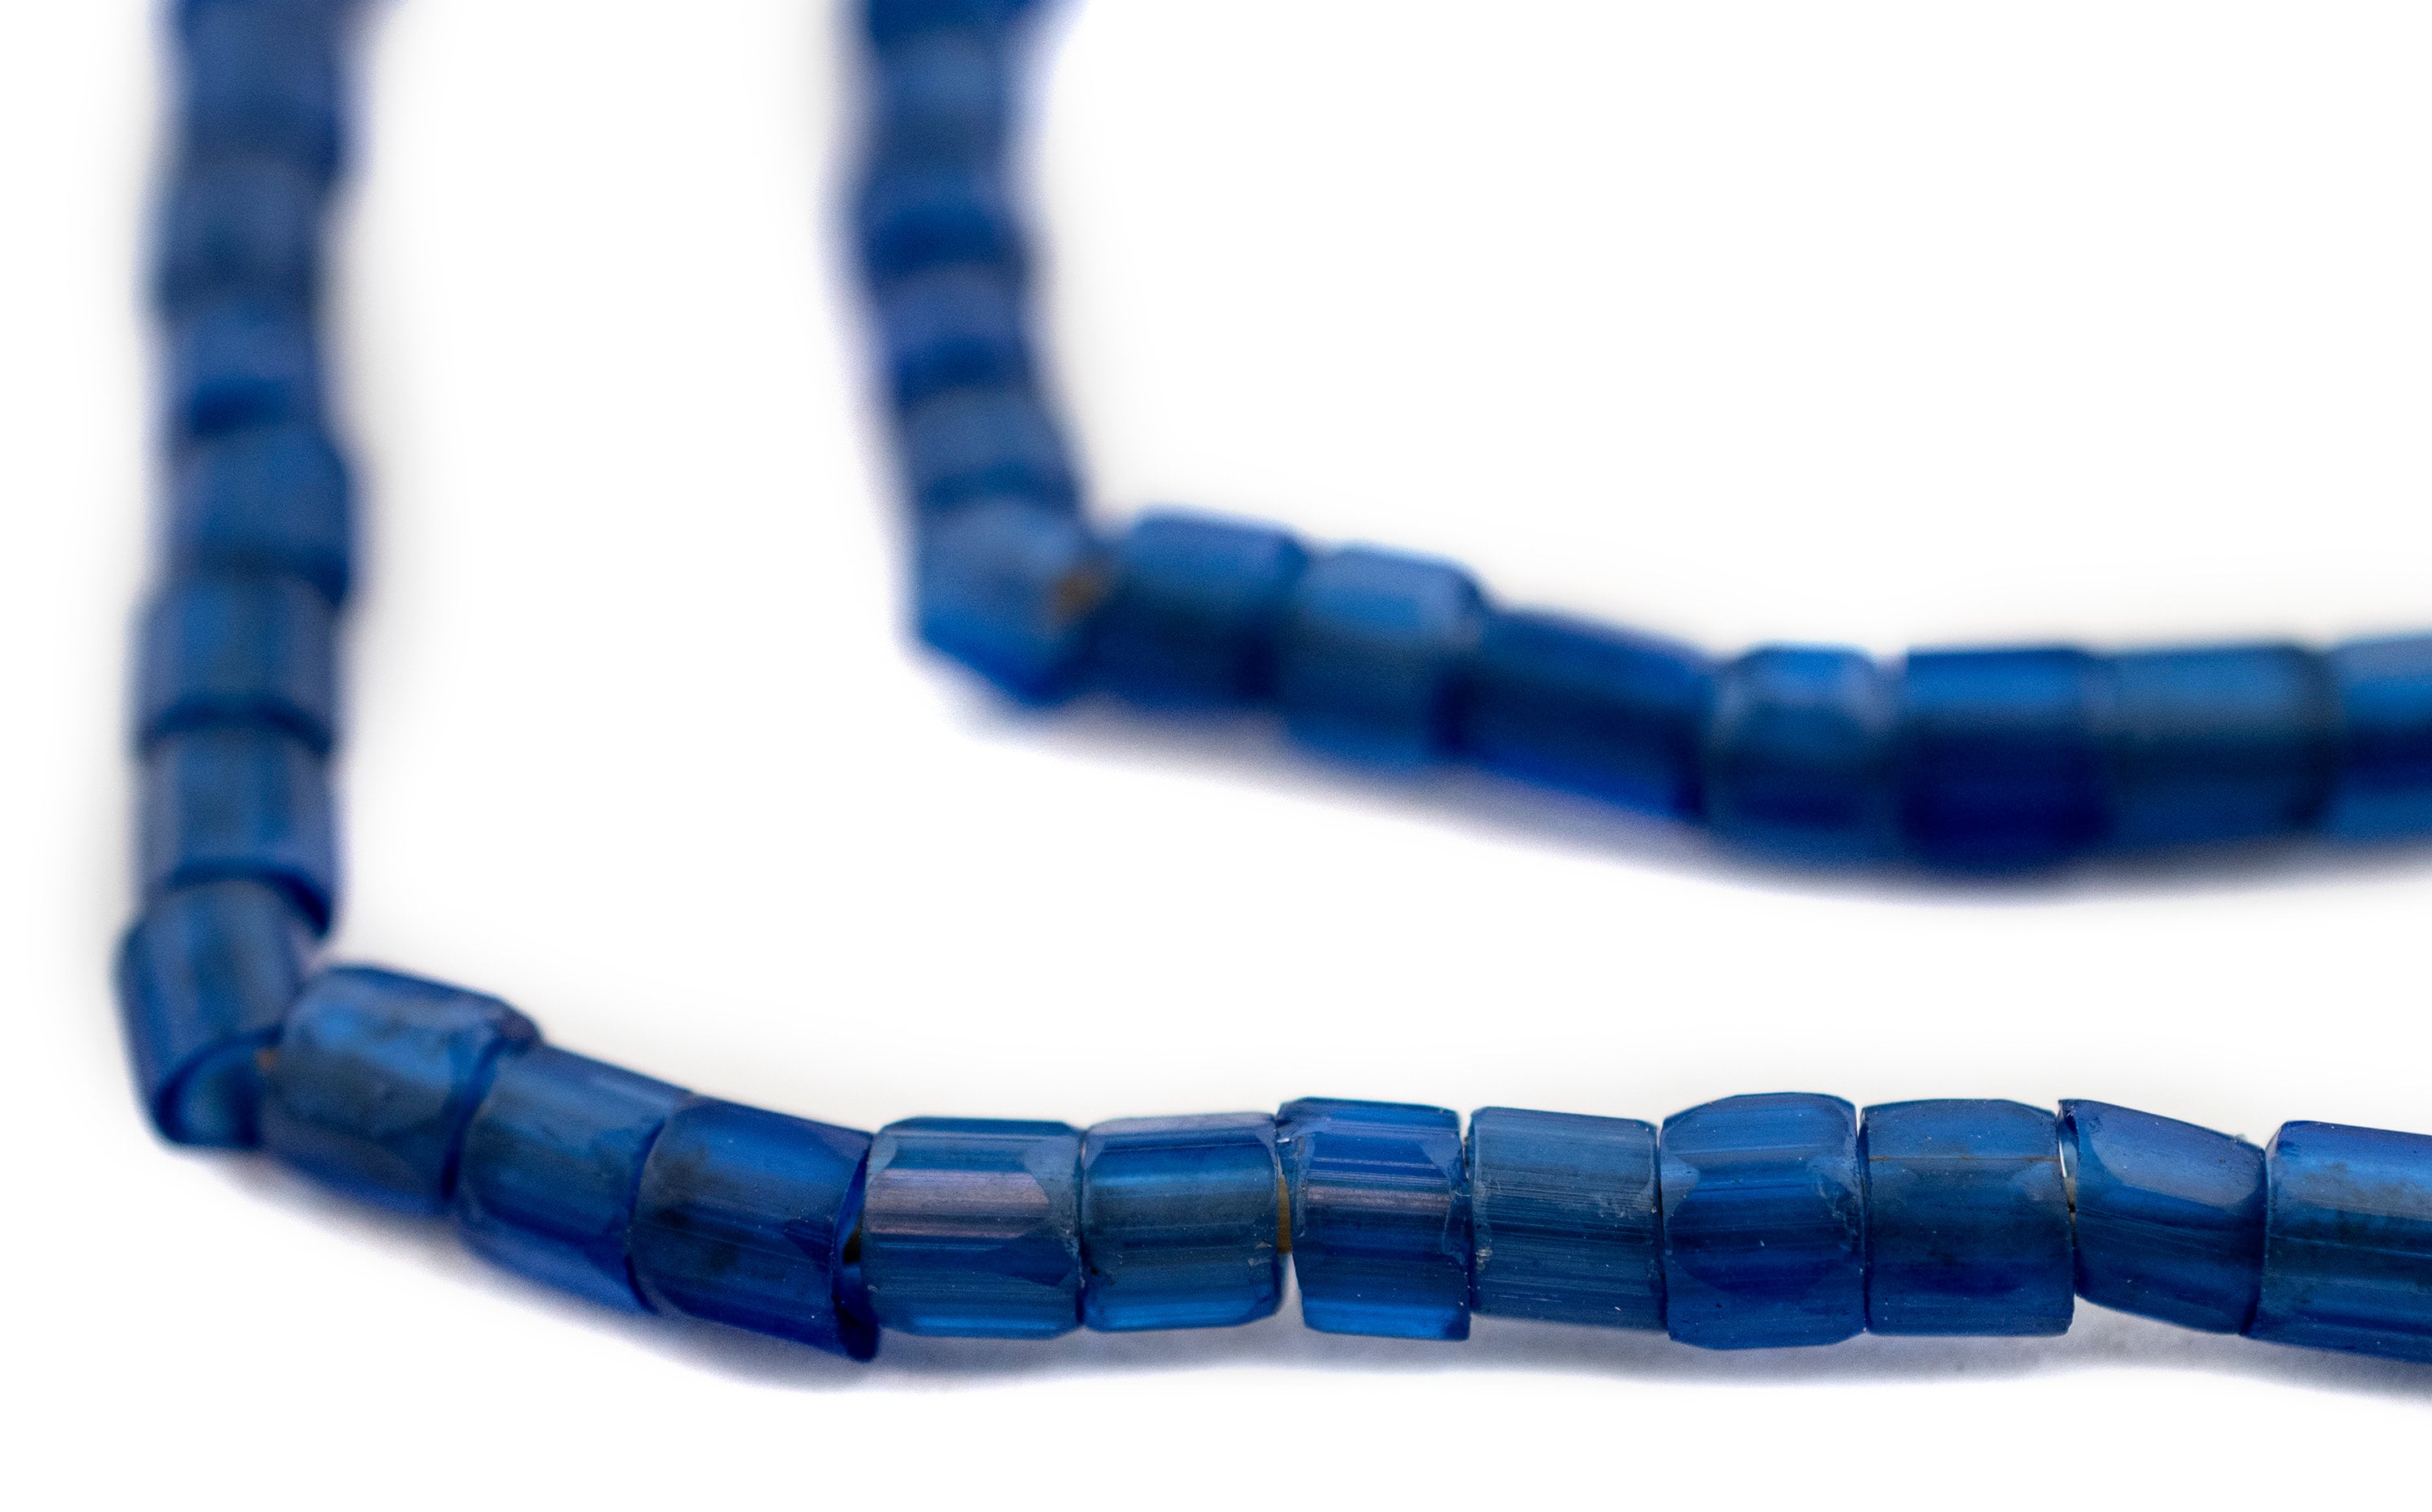 A Strand of Antique Opalescent Baby Moon Beads from Ethiopia. African  Trade Glass Beads CRJP119